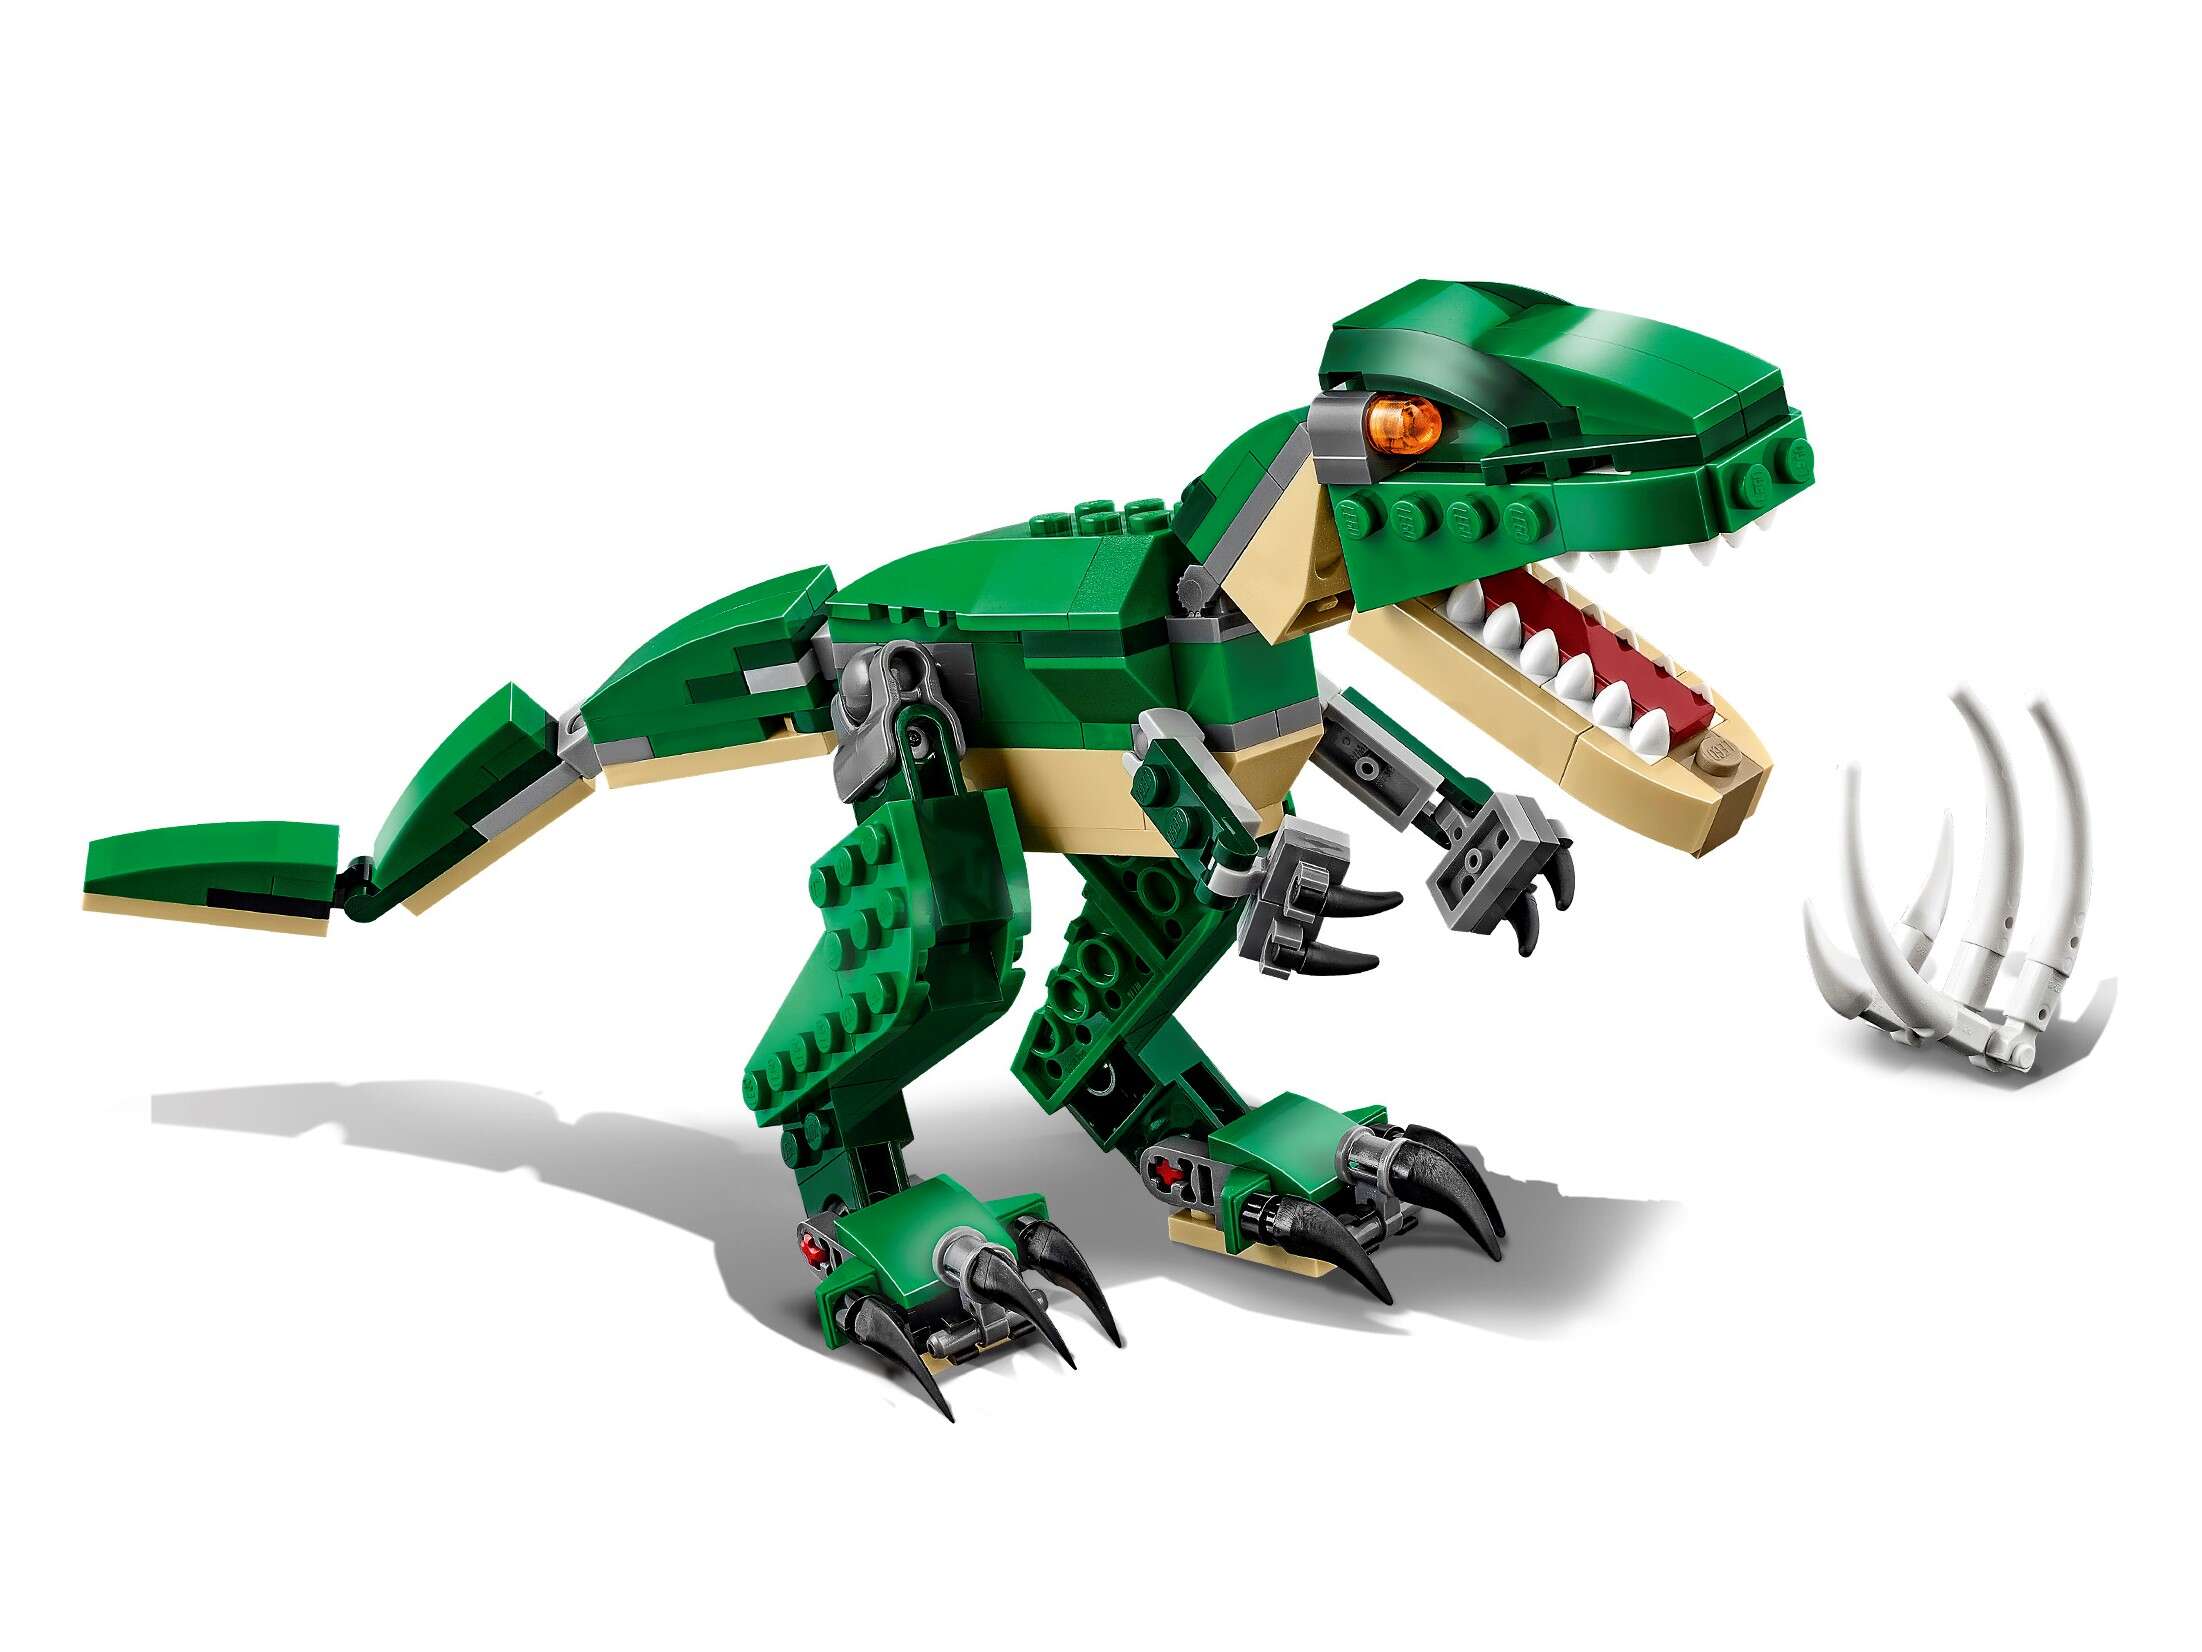 LEGO 31058 Creator Dinosaurier, 3-in-1 Modell T-Rex, Triceratops, Pterodactylus